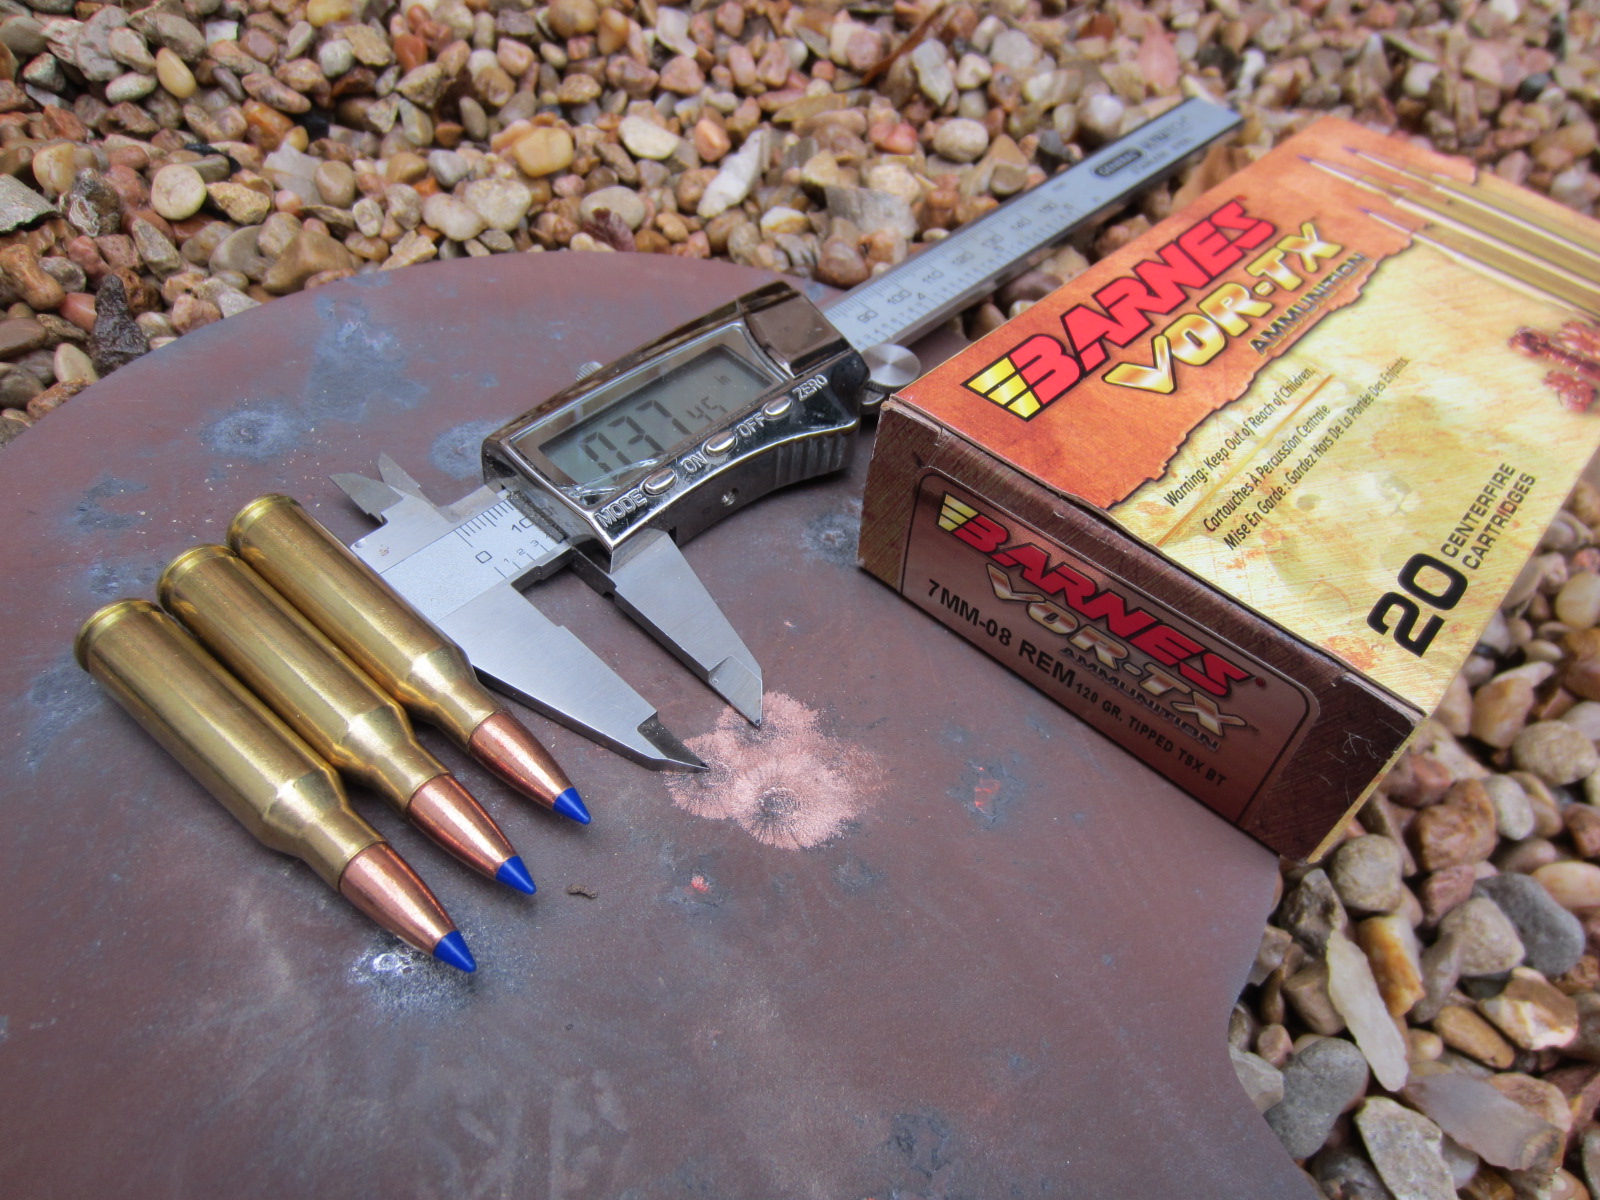 Barnes-7mm08-120g-TTSX-group-as-fired-from-Weatherby-Vangaurd-Mark-2-with-Trijicon-Accupoint-3-9-mildot-greendot.jpg